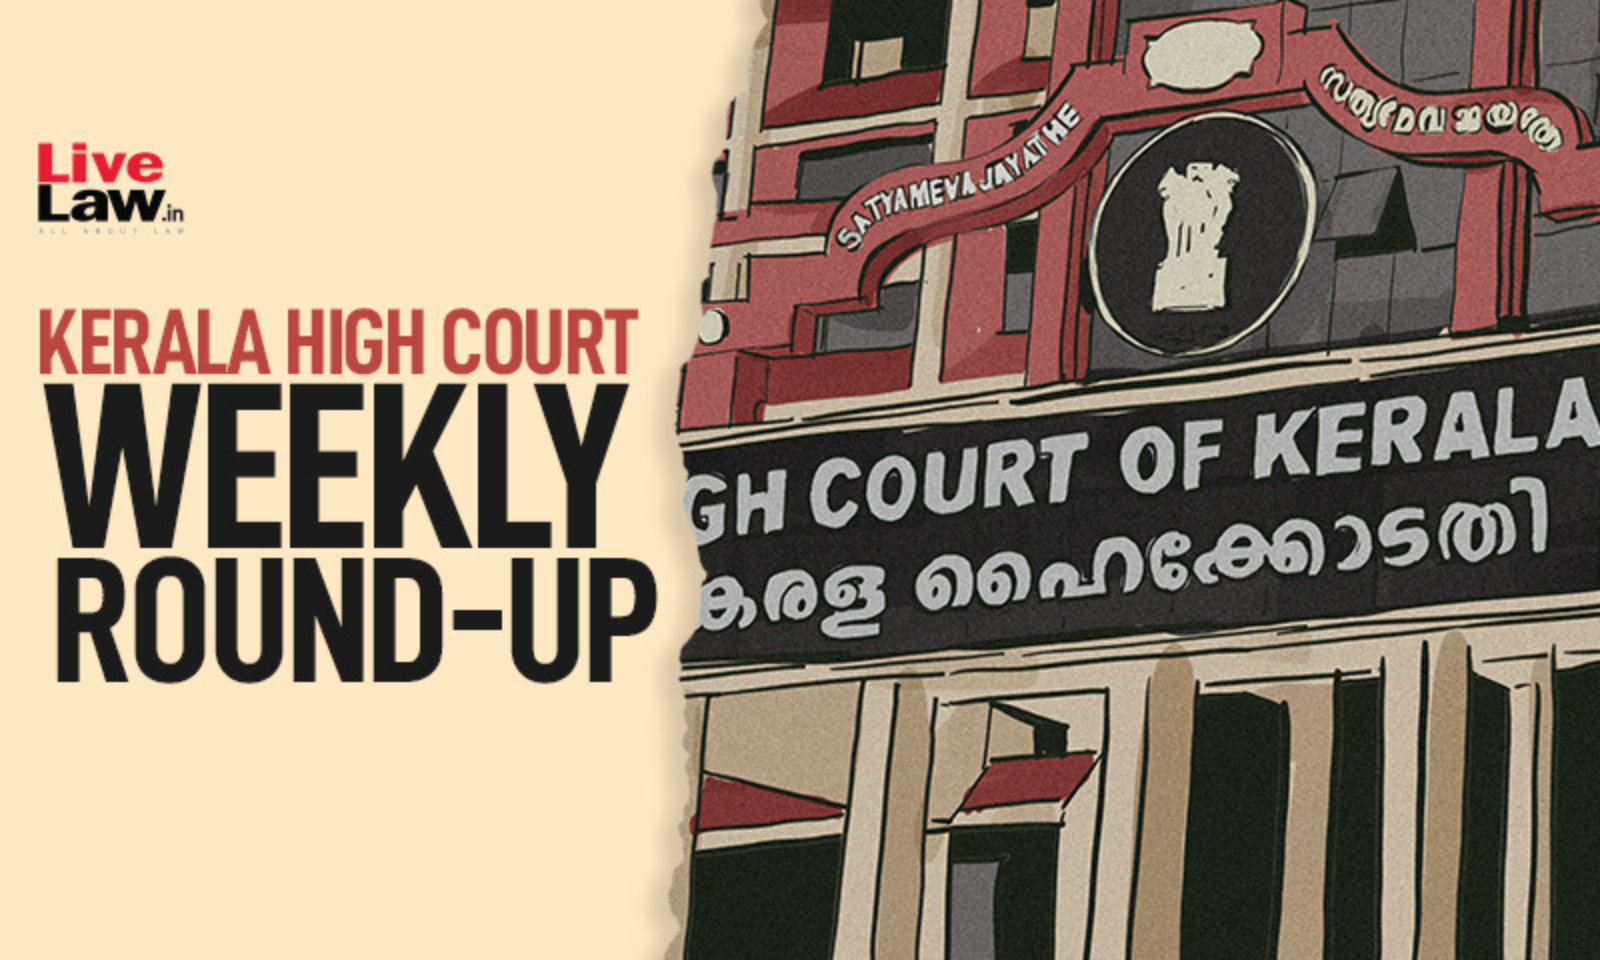 Sex Videos Kerala Force - Kerala High Court Weekly Round-Up: July 18 To July 24, 2022